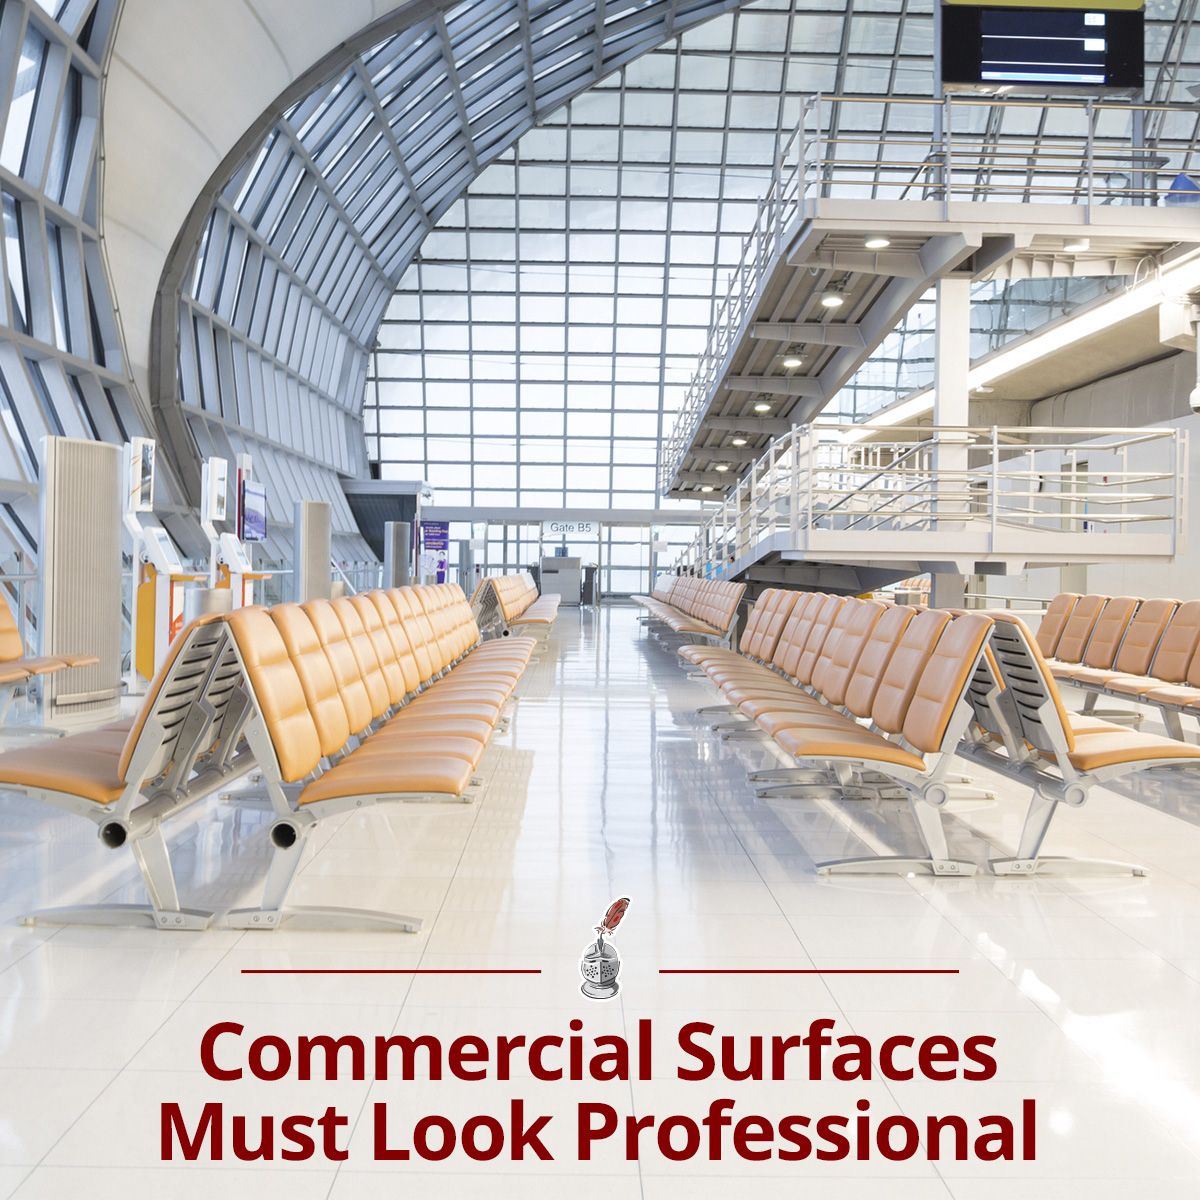 Commercial Surfaces Must Look Professional